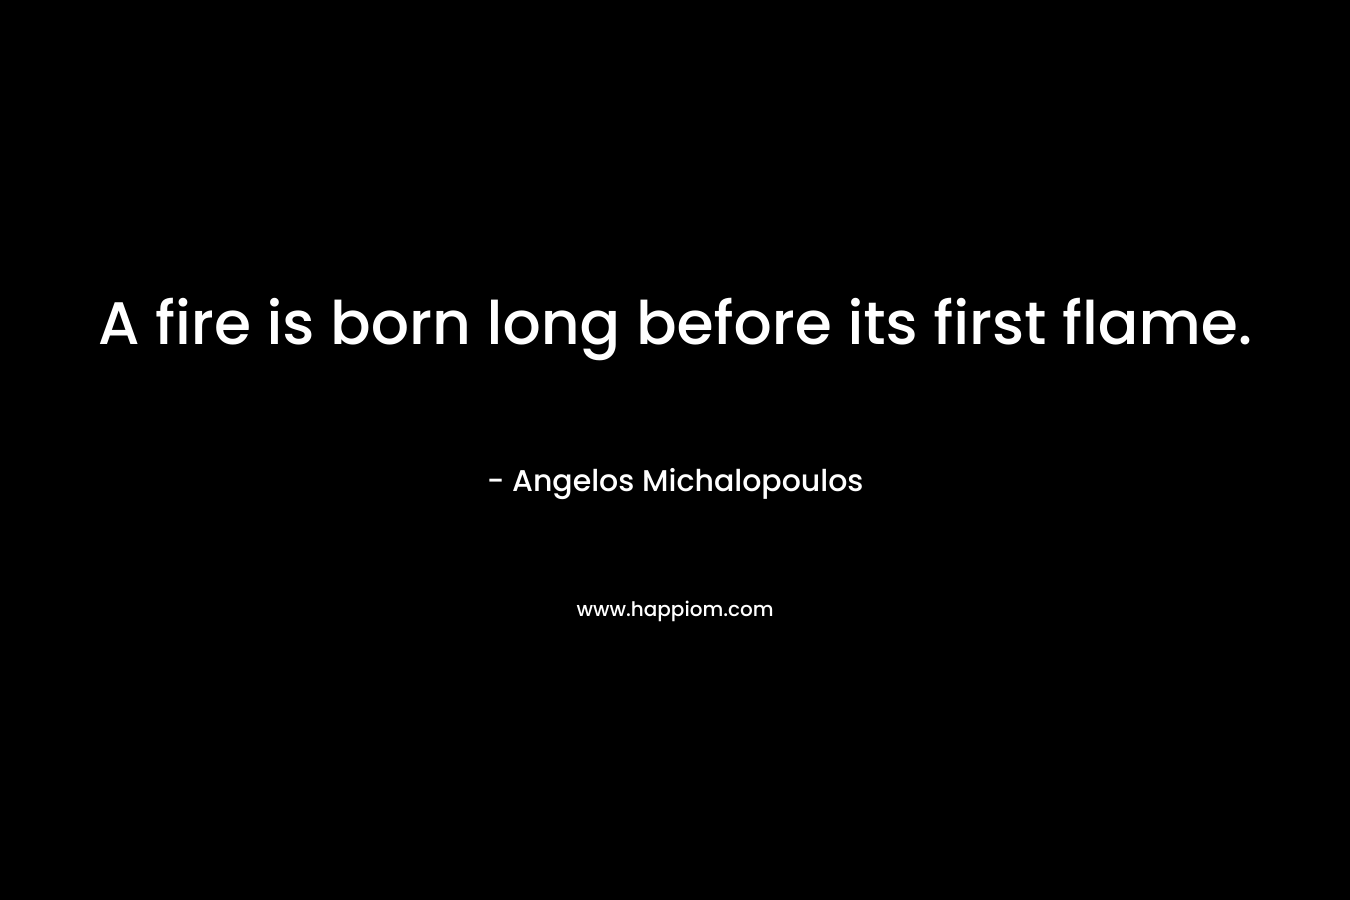 A fire is born long before its first flame.